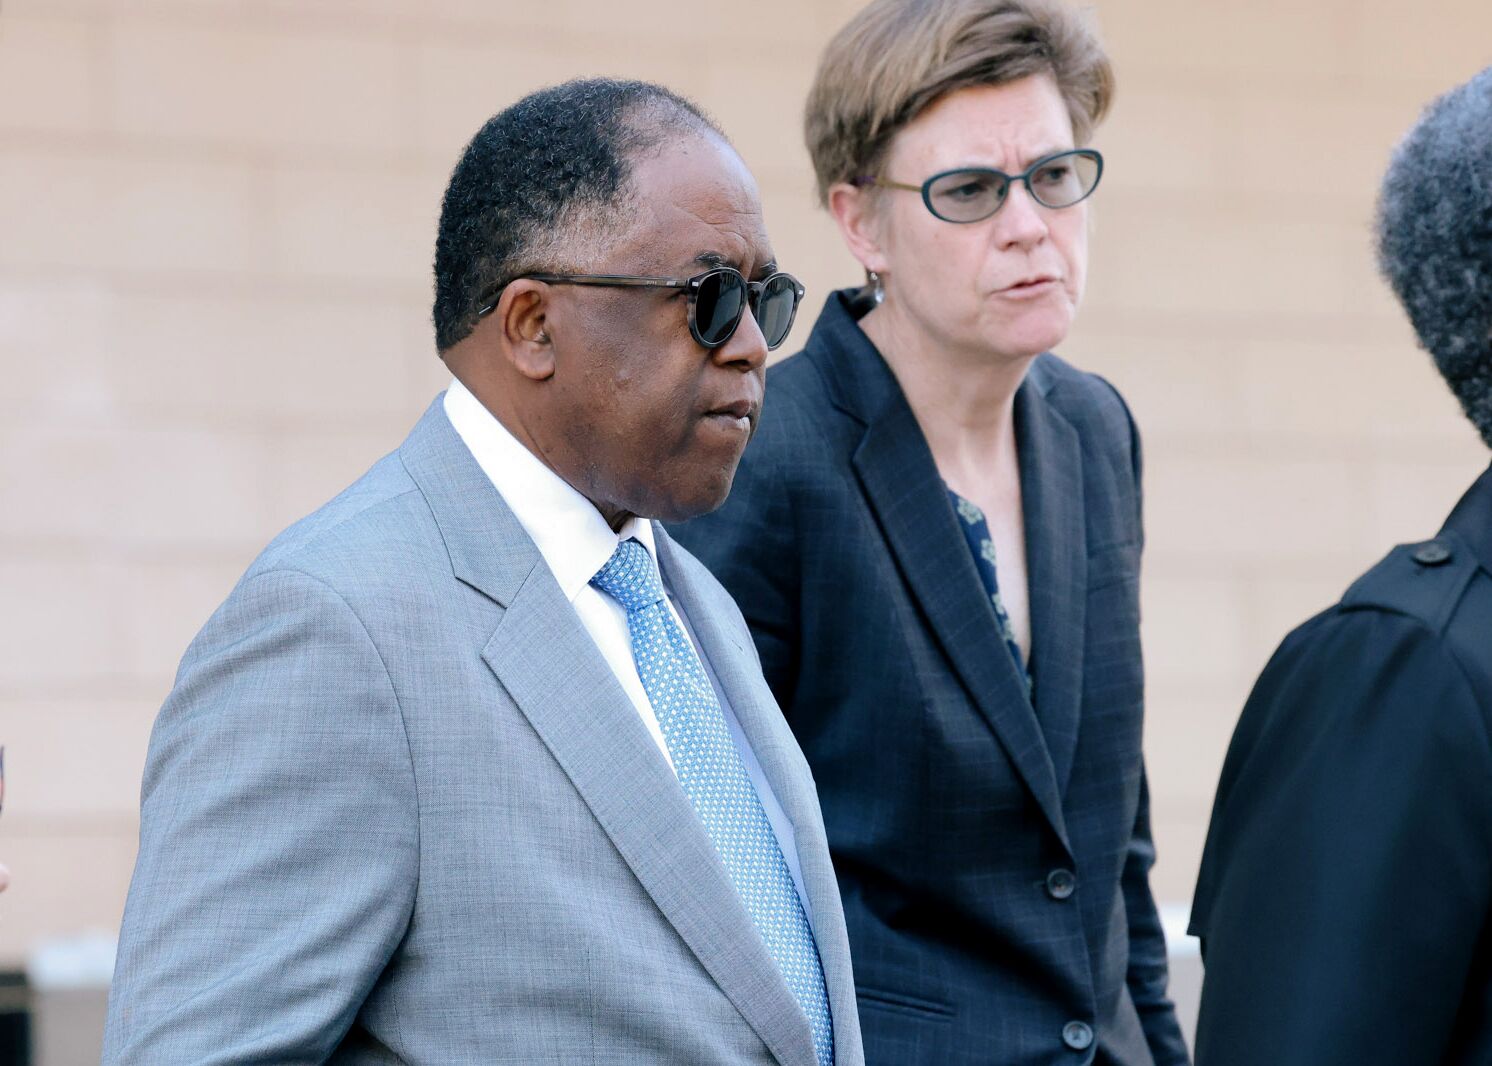 Mark Ridley-Thomas found guilty in corruption case